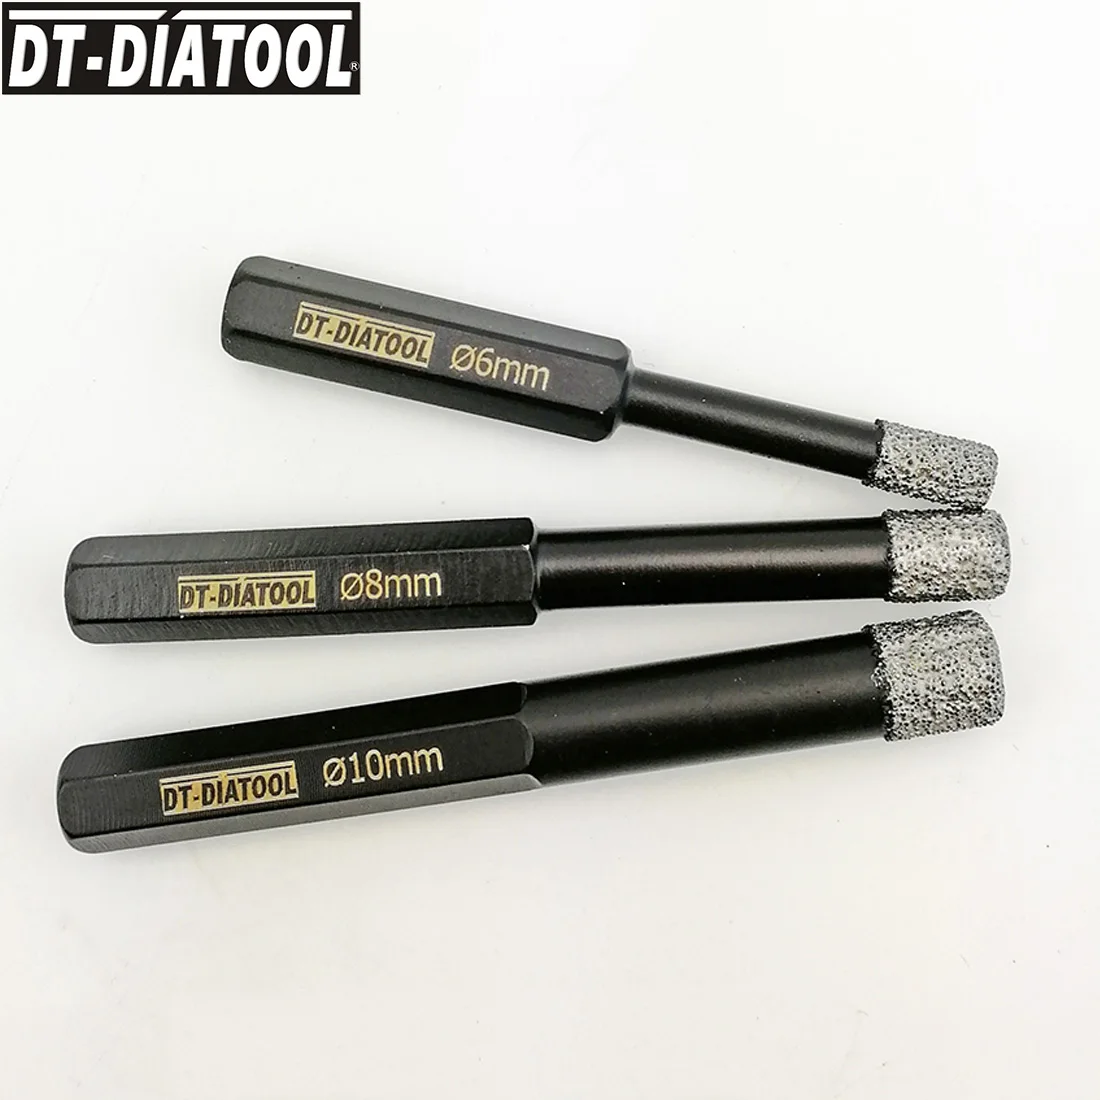 

DT-DIATOOL 3pcs/set Dia 6/8/10mm Dry Vacuum Brazed Diamond Drilling Core Bits Drill Hole Saw for Granite Marble with Hex shank